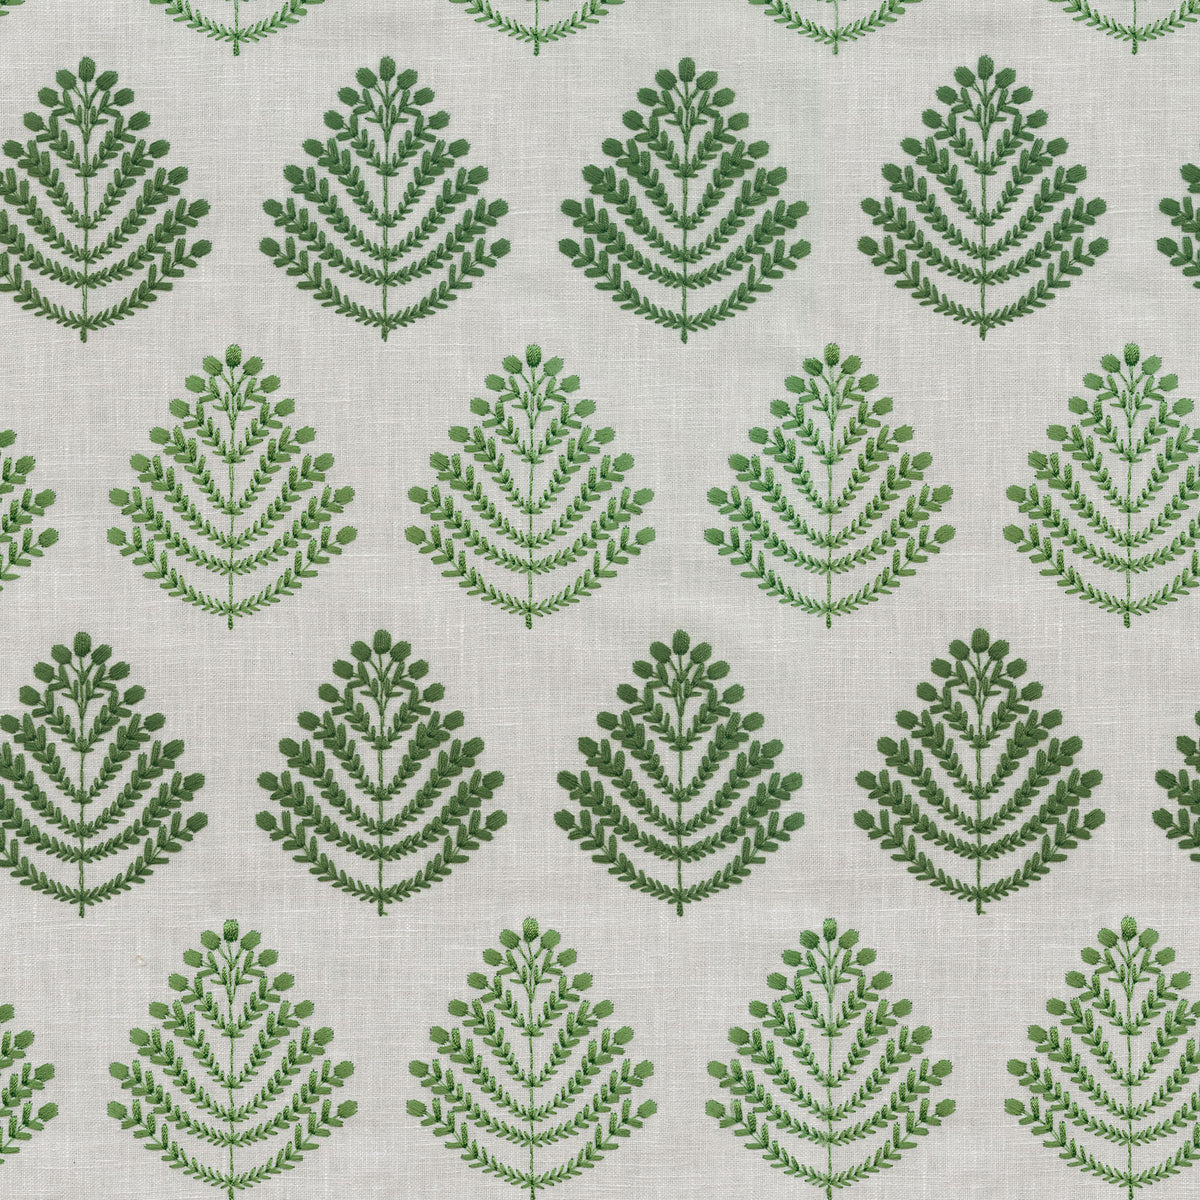 P/K Lifestyles Royal Fern Embroidery - Leaf 408841 Upholstery Fabric